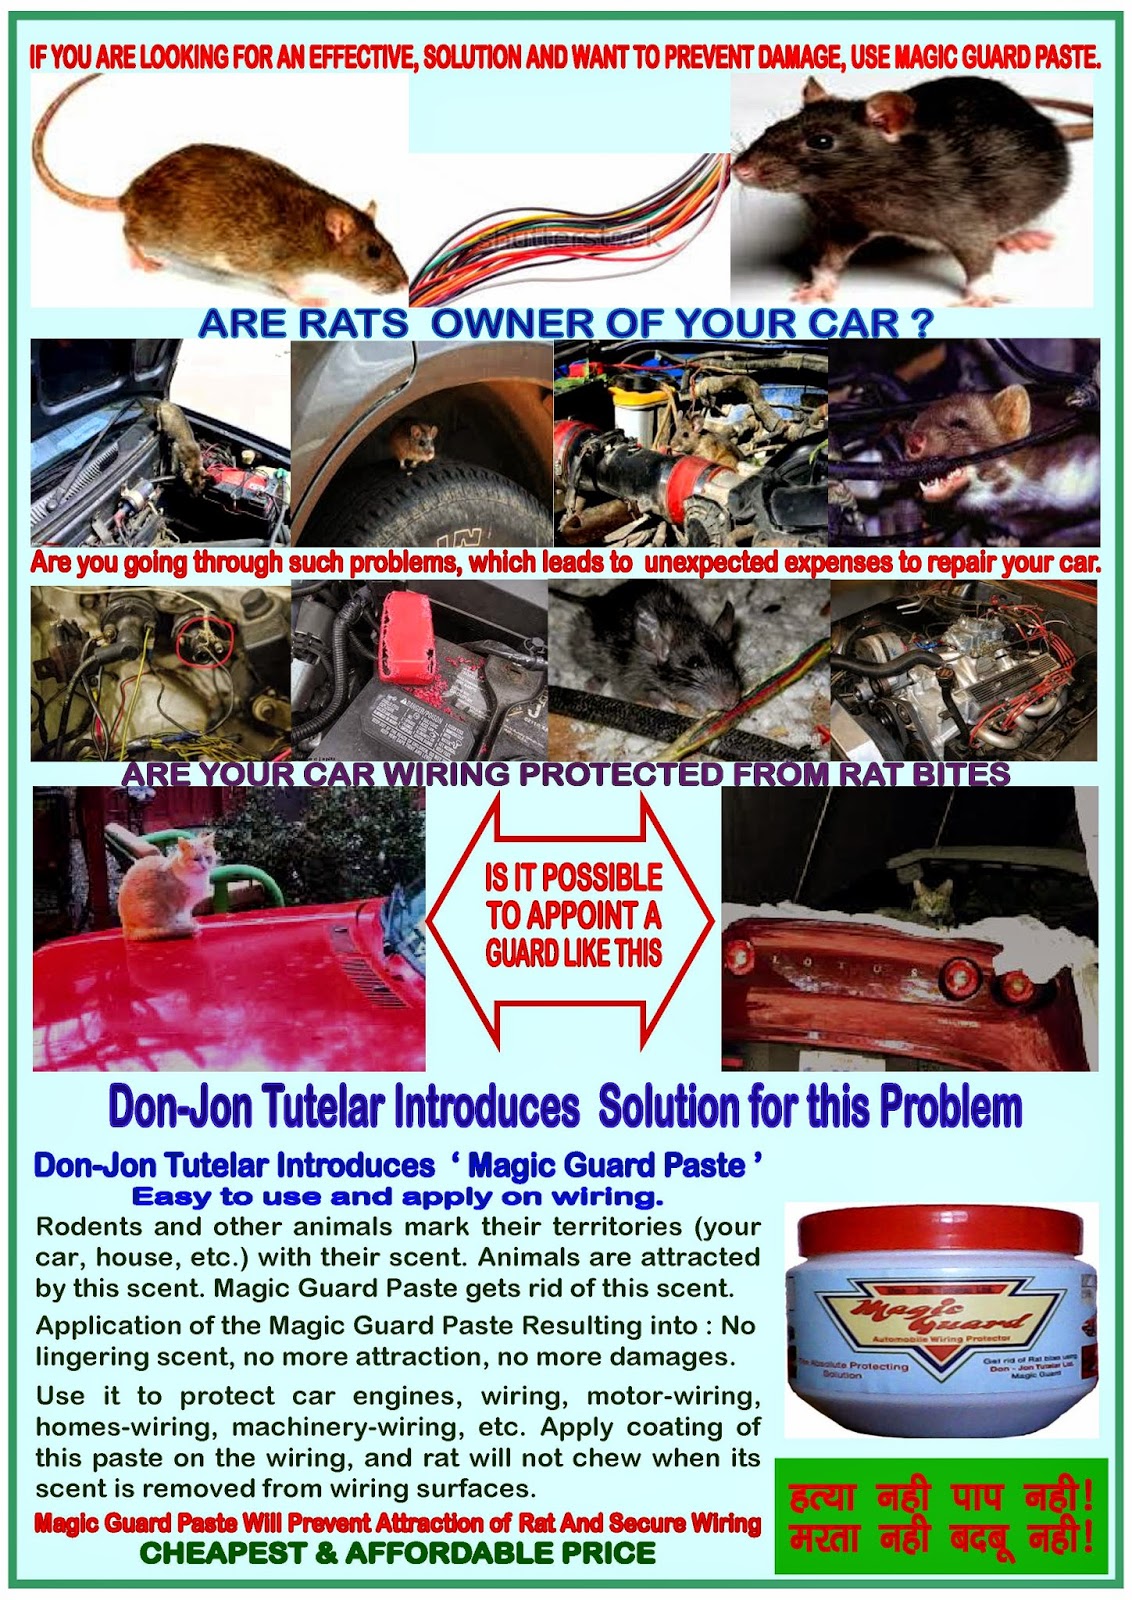 How To Prevent Car Wires from Rats: Protect your car from rat